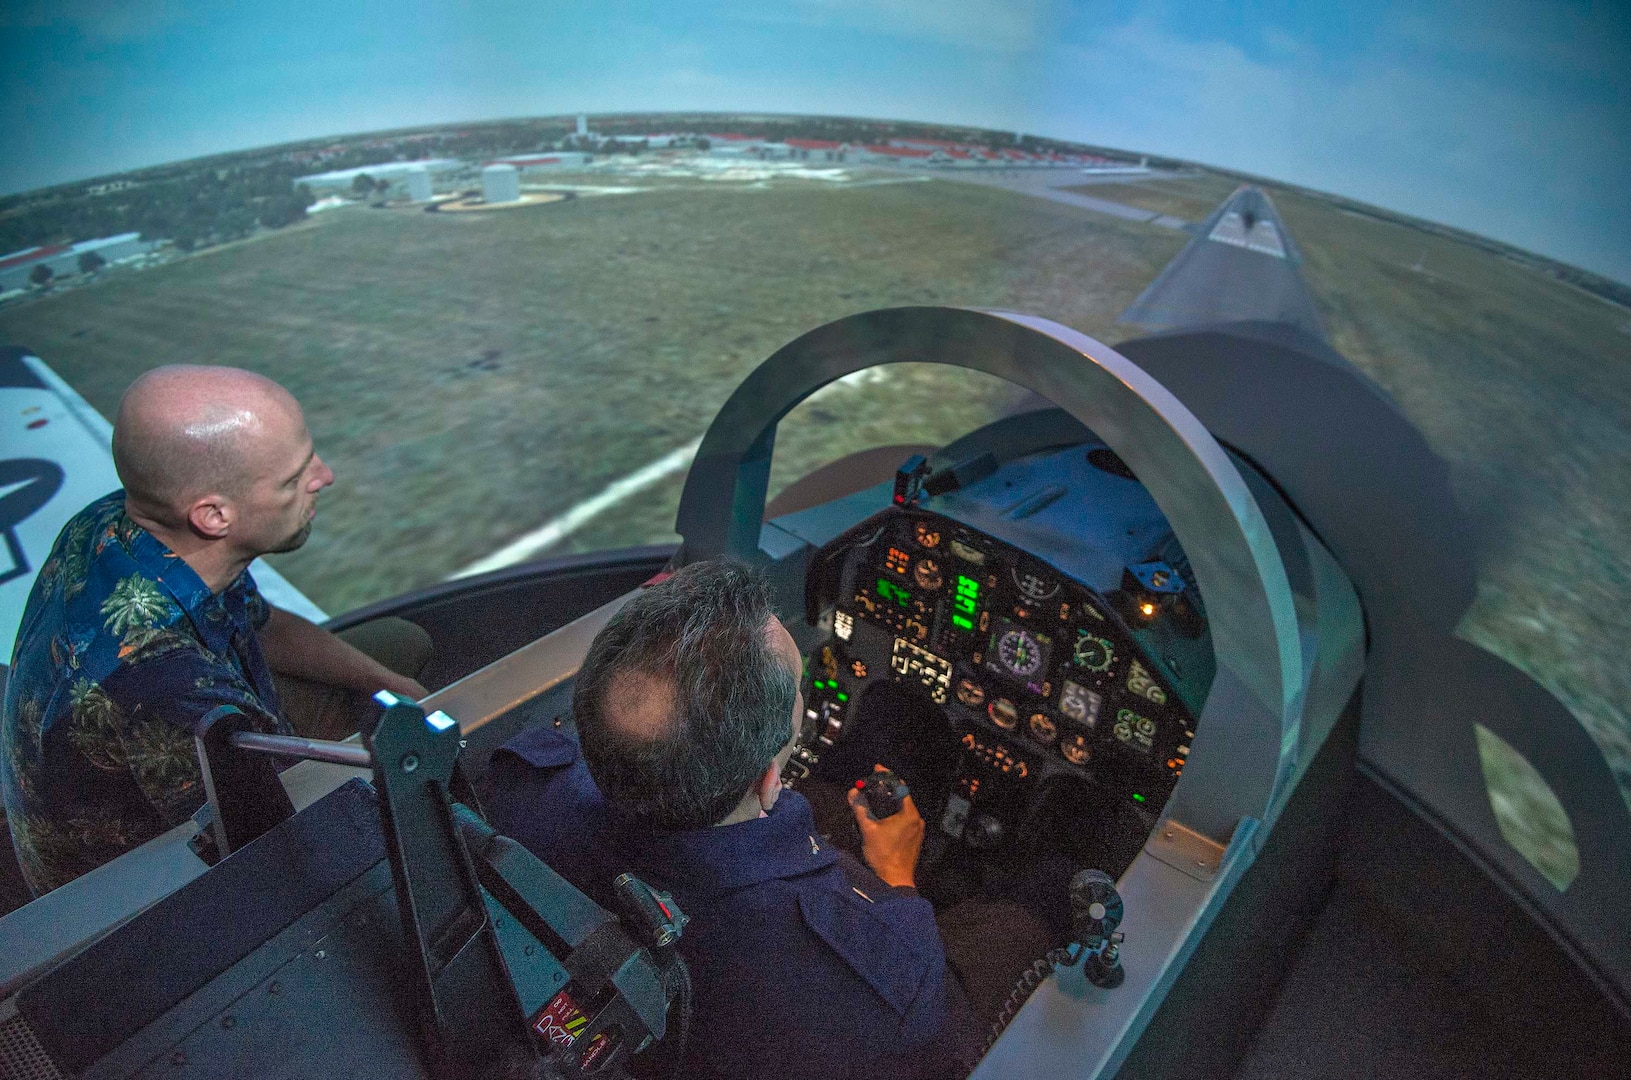 Brazilian air force Maj. Gen. Ricardo Magalhaes, defense and air attaché, flies a T-6 simulator Dec. 11, 2014 during a visit to the 435th Flying Training Squadron at Joint Base San Antonio-Randolph, Texas. The flight simulator creates a realistic environment for students to experience flying a plane. (U.S. Air Force photo by Johnny Saldivar)